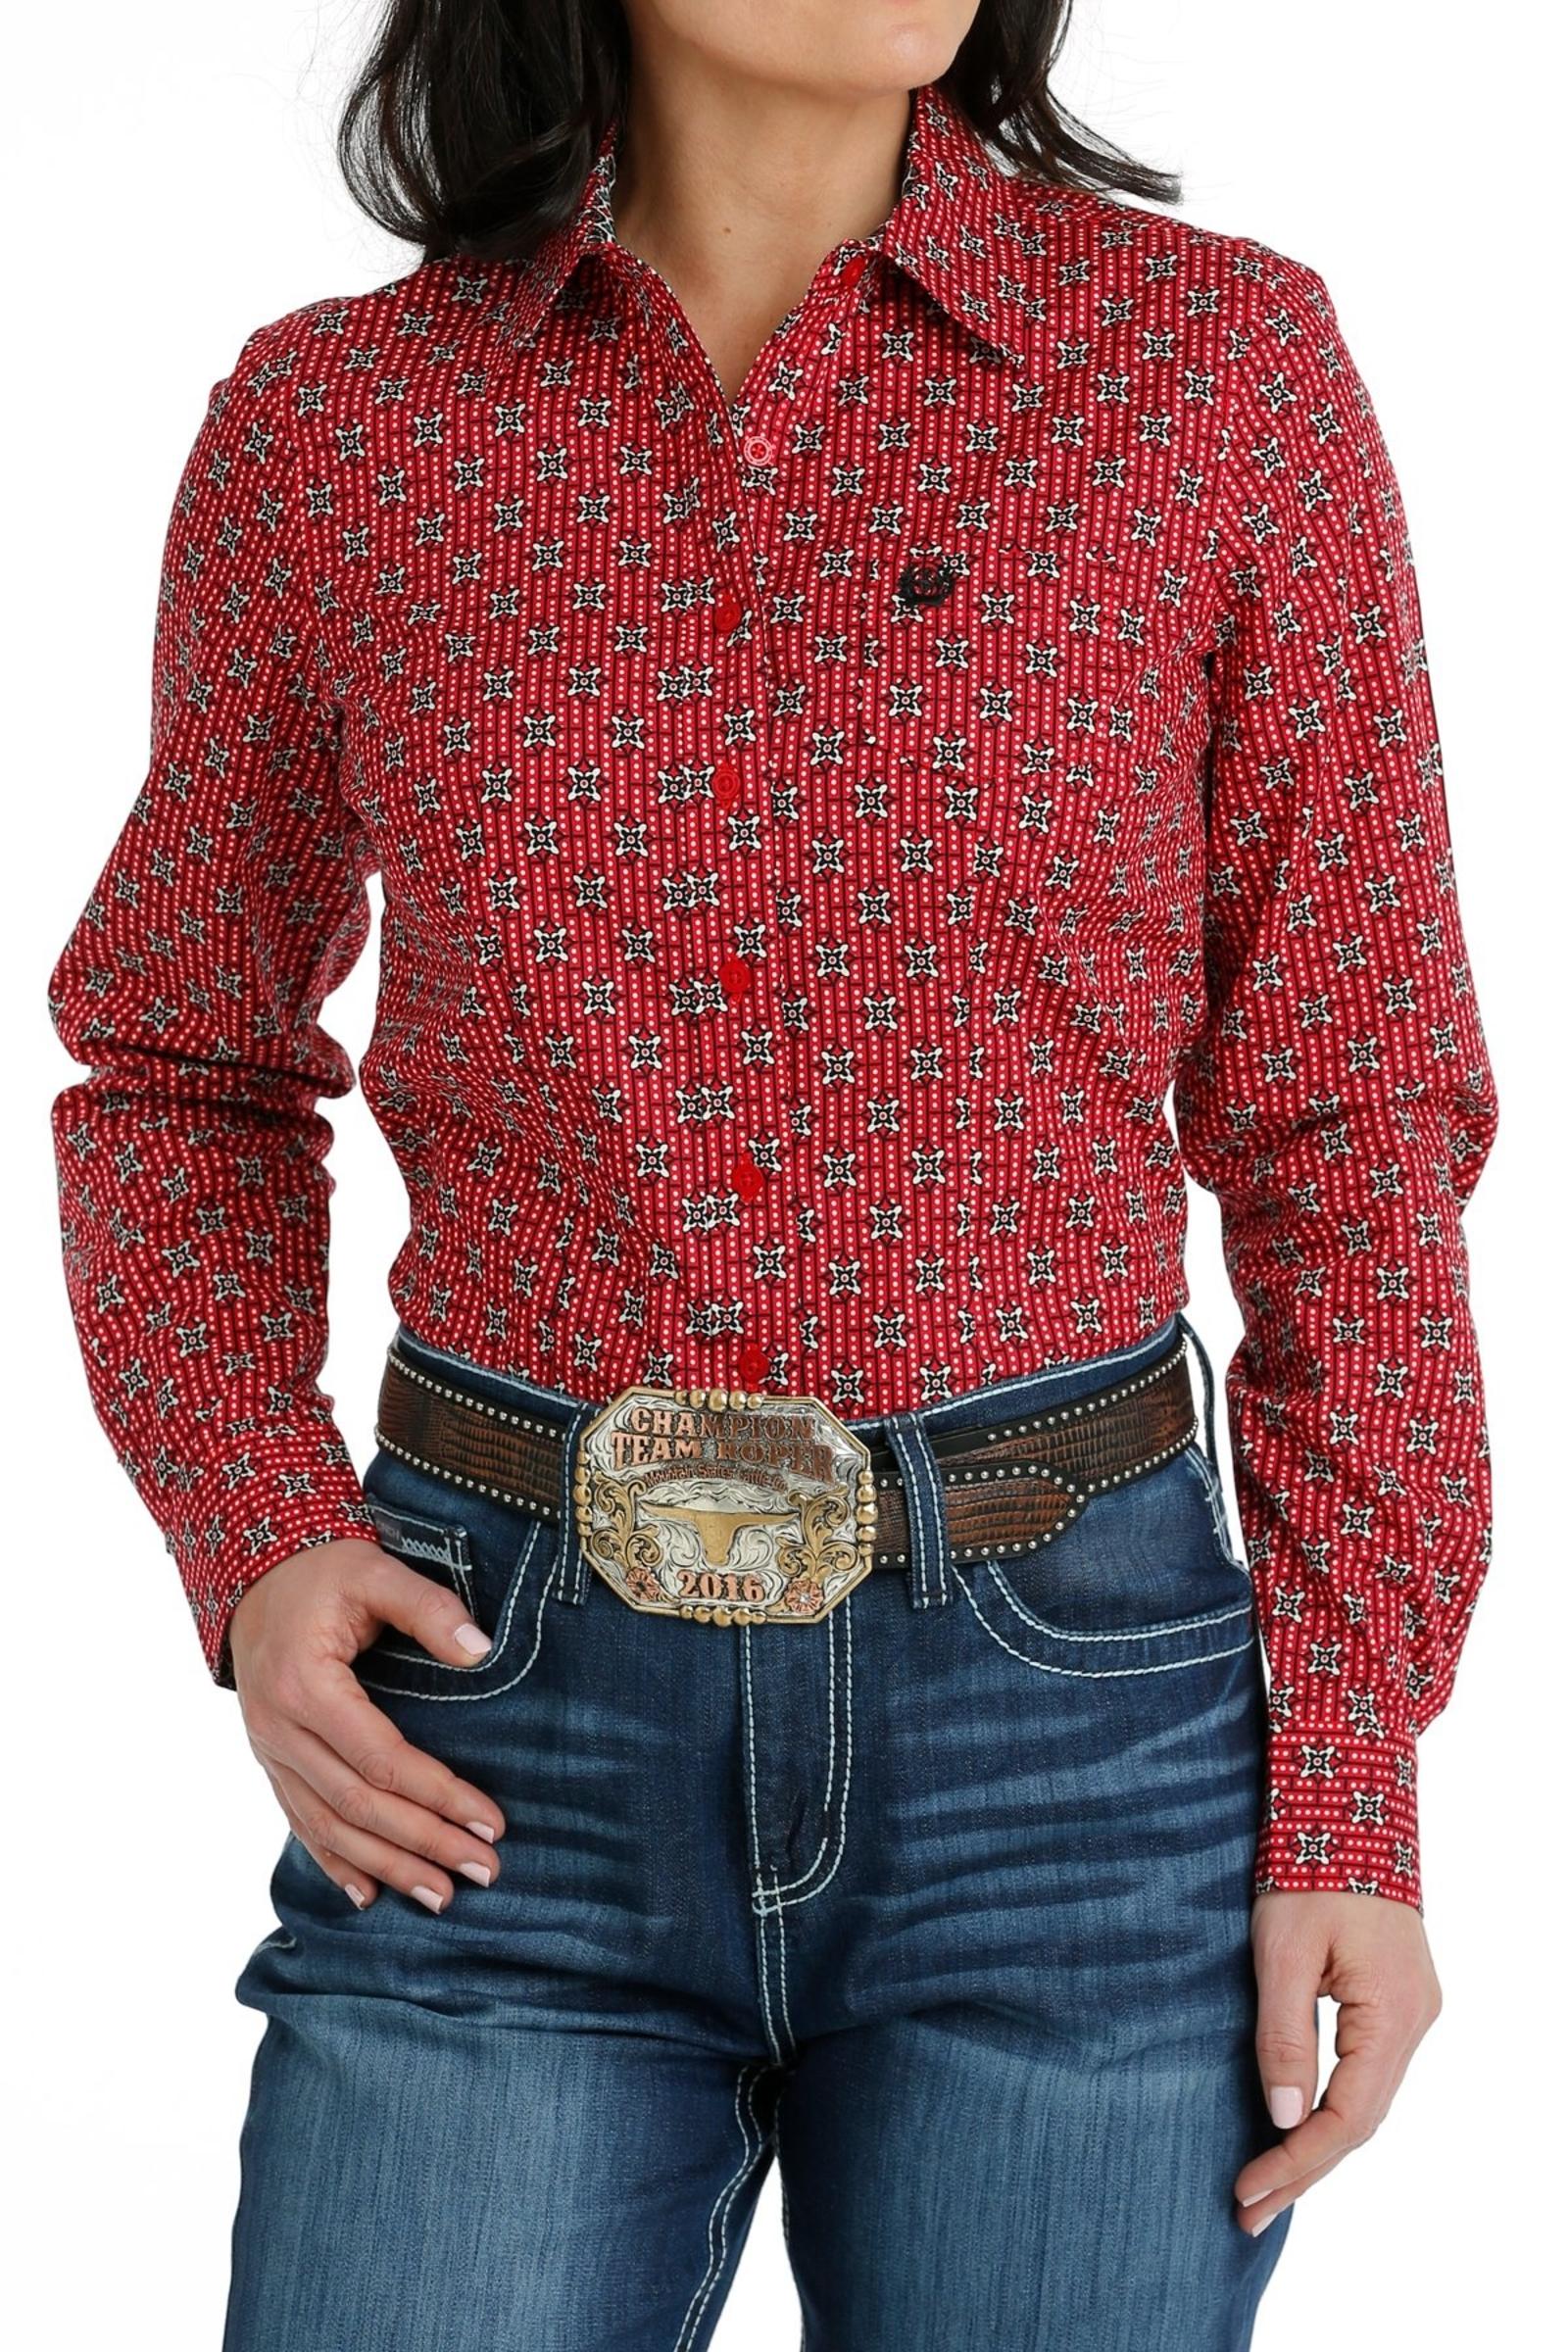 Front Cinch Jeans Women's Button-Down Western Shirt - Red